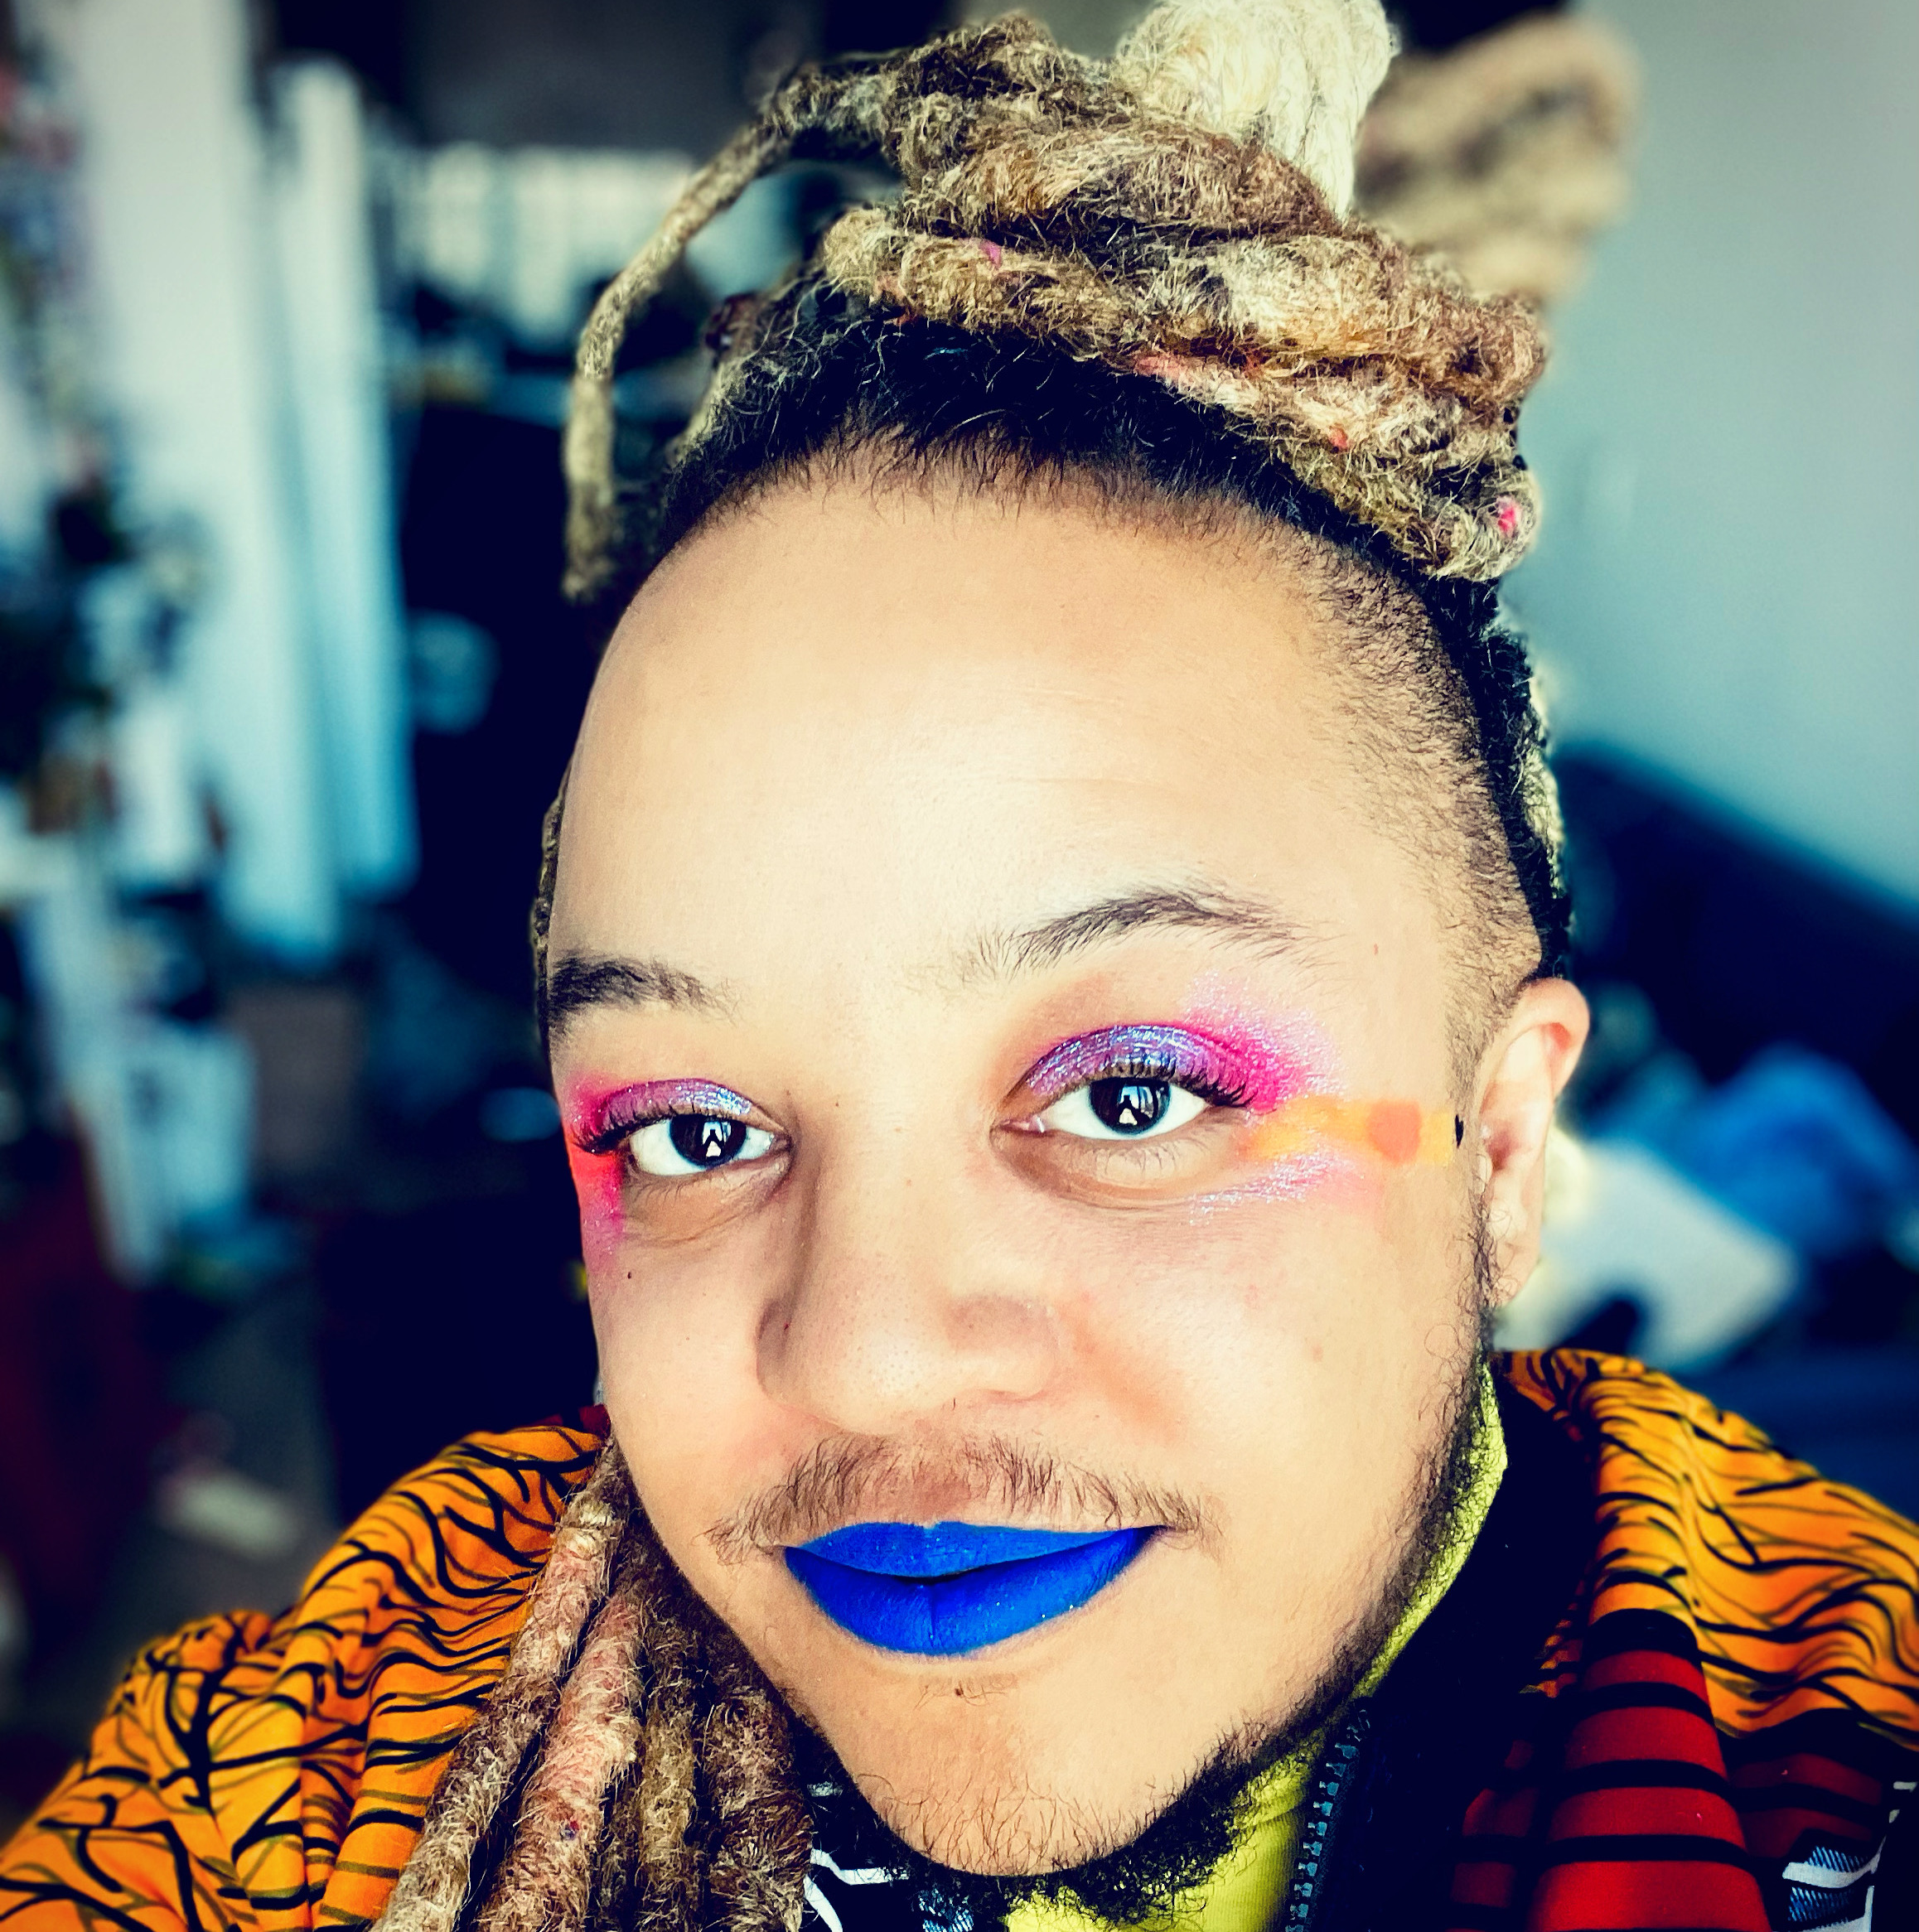 Syrus smiles up at the camera. He wears blue lipstick and pink, blue, and orange eyeshadow. His blonde dreadlocks are tied up and he wears a colourful jacket.